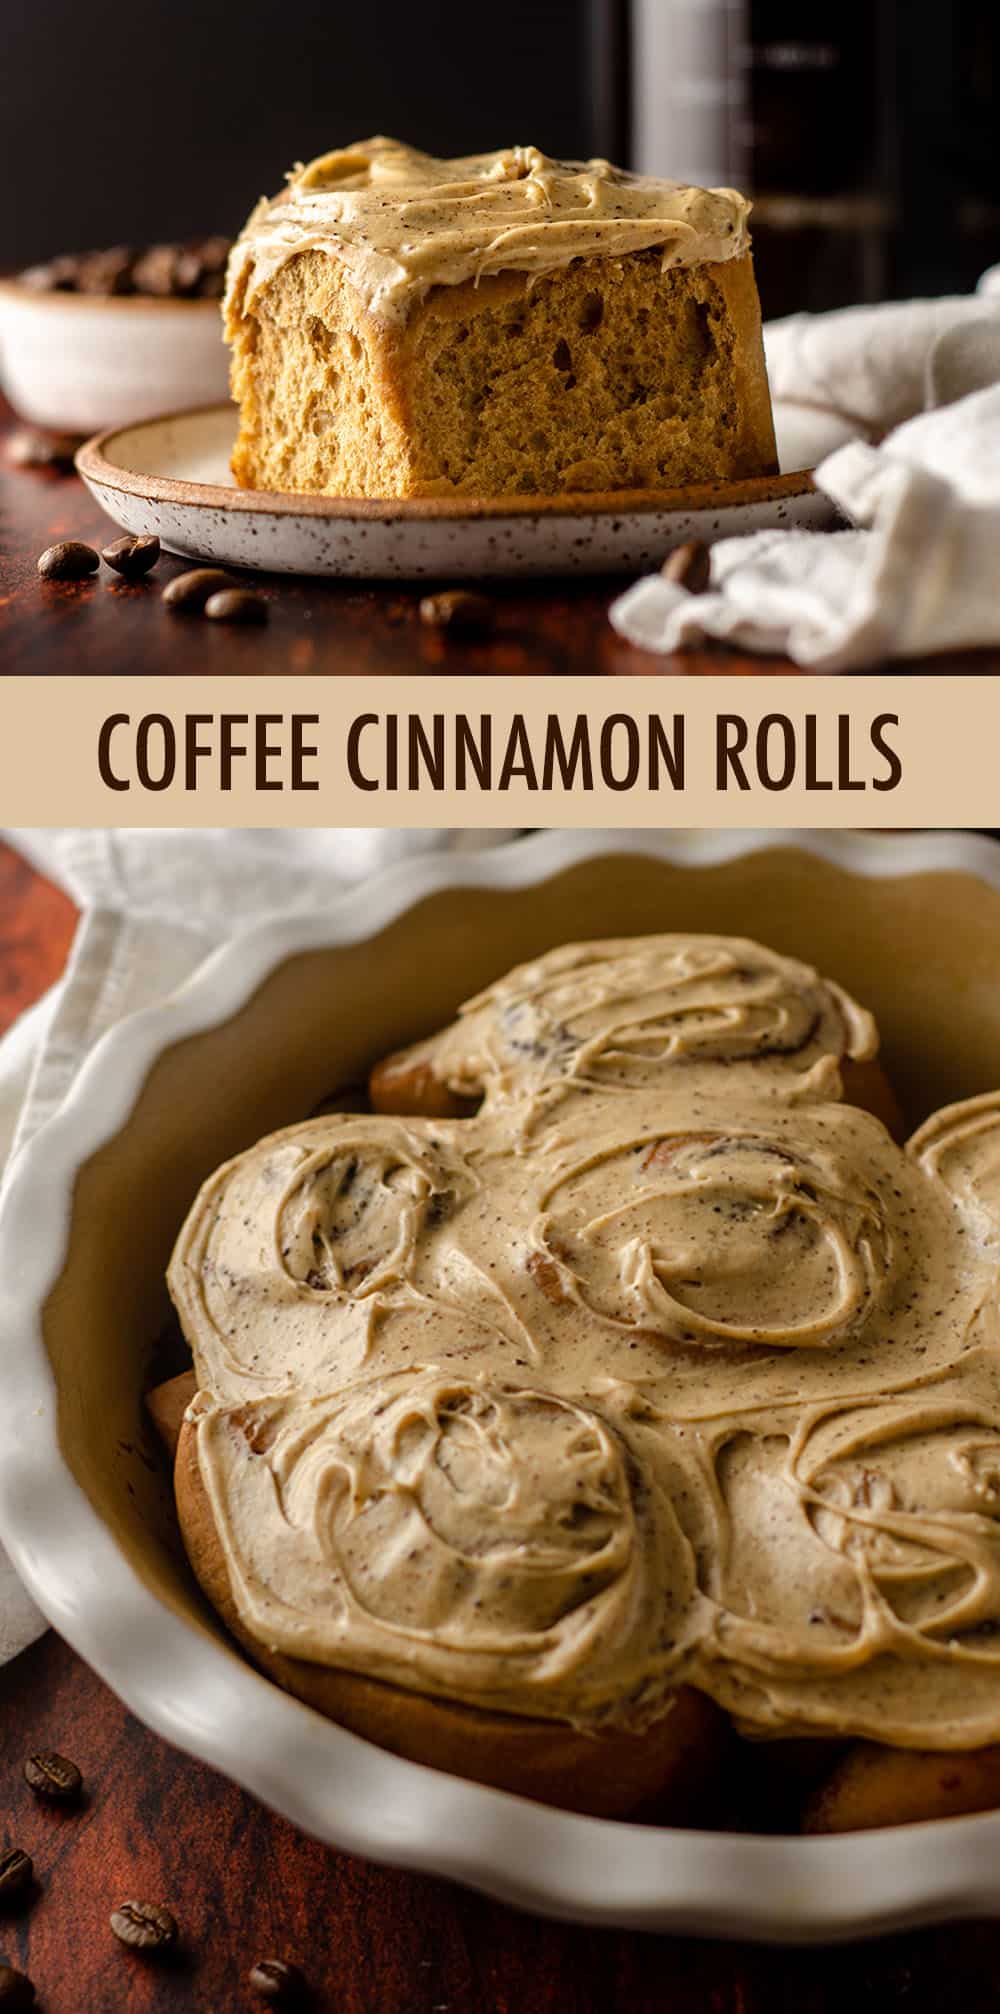 Decadent coffee cinnamon rolls slathered in coffee cream cheese frosting are the perfect complement to your morning cup of coffee. via @frshaprilflours